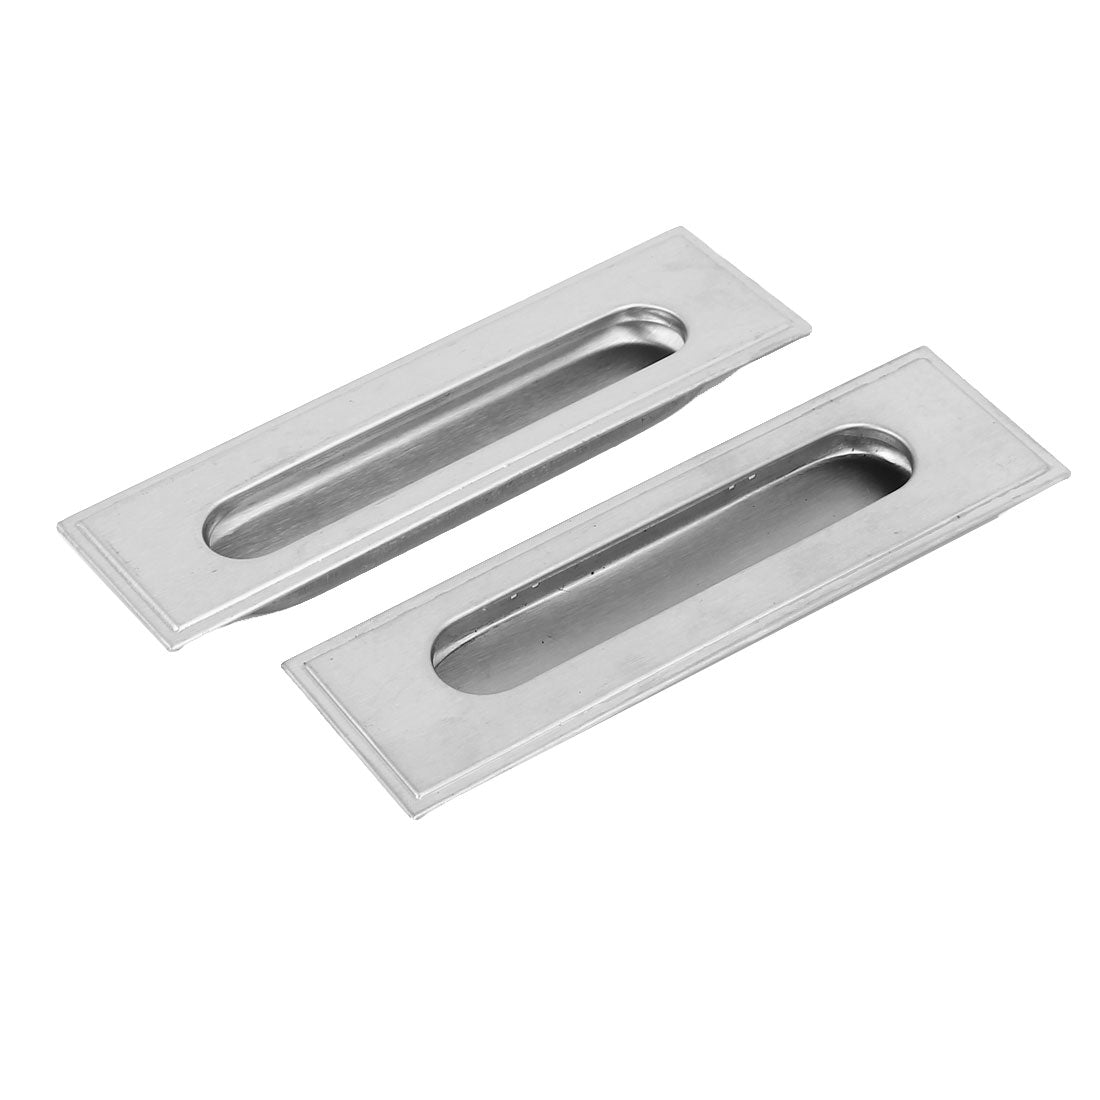 uxcell Uxcell Sliding Door Cabinet Flush Recessed Pull Handle Silver Tone 14cm Length 2pcs